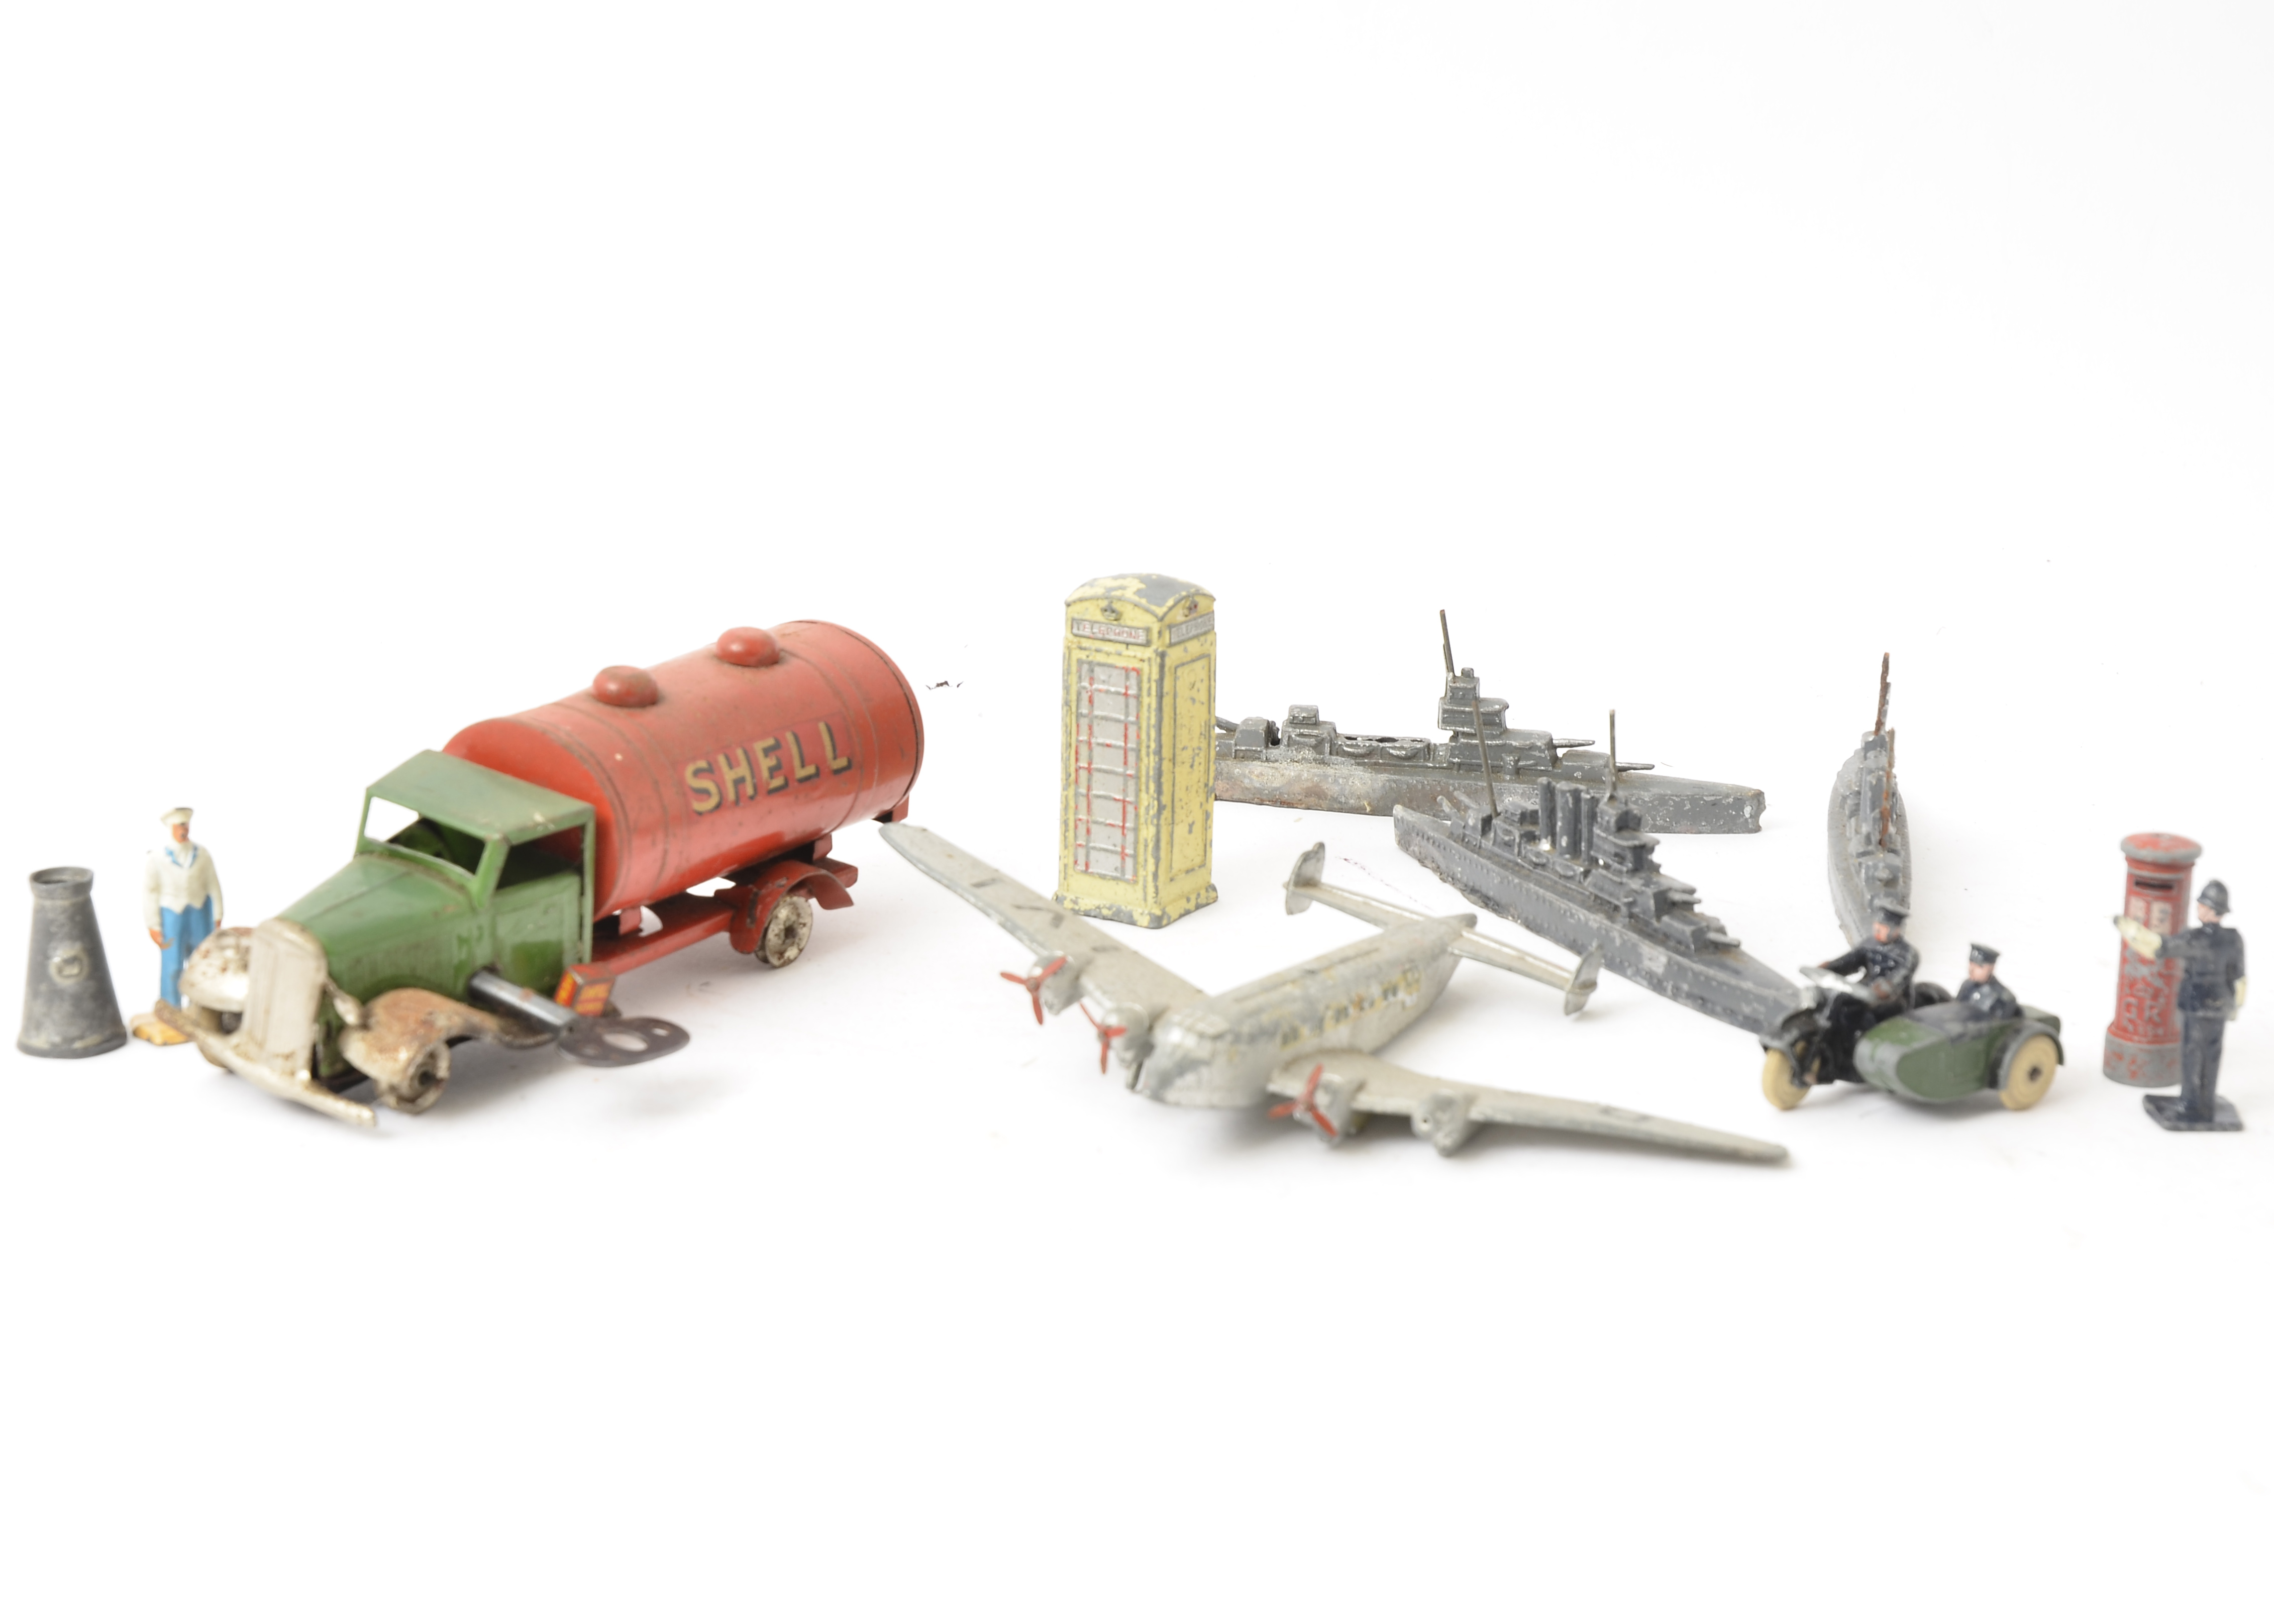 Prewar and Postwar Dinky and Other Diecast Models, a playworn group including Dinky Toys trolley bus